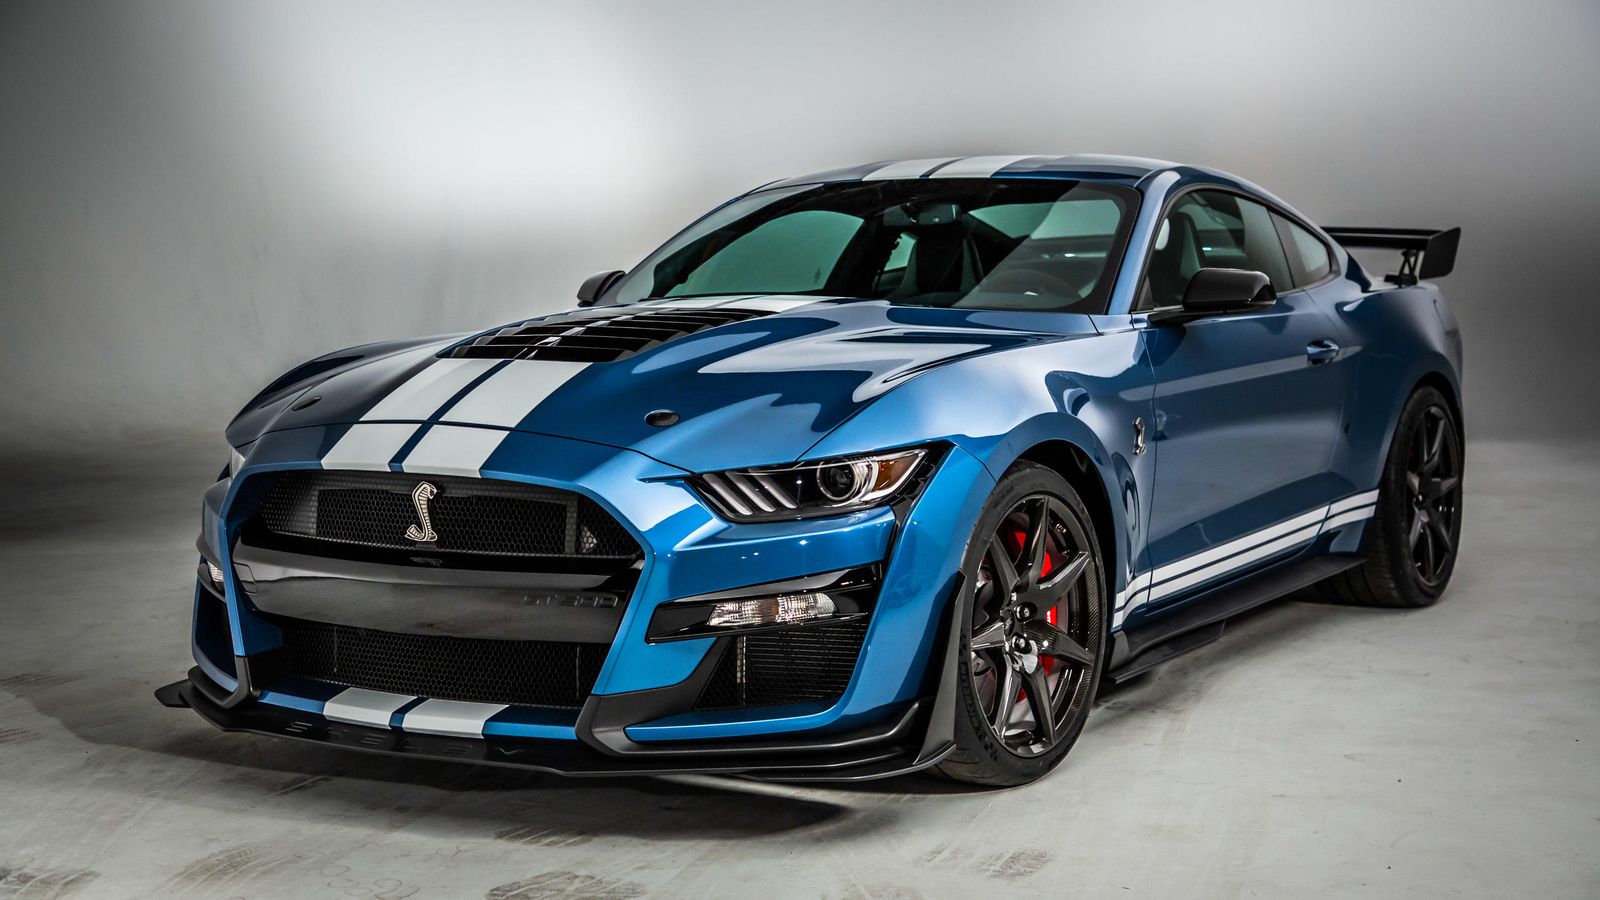 2020-ford-shelby-mustang-gt500-1.jpg